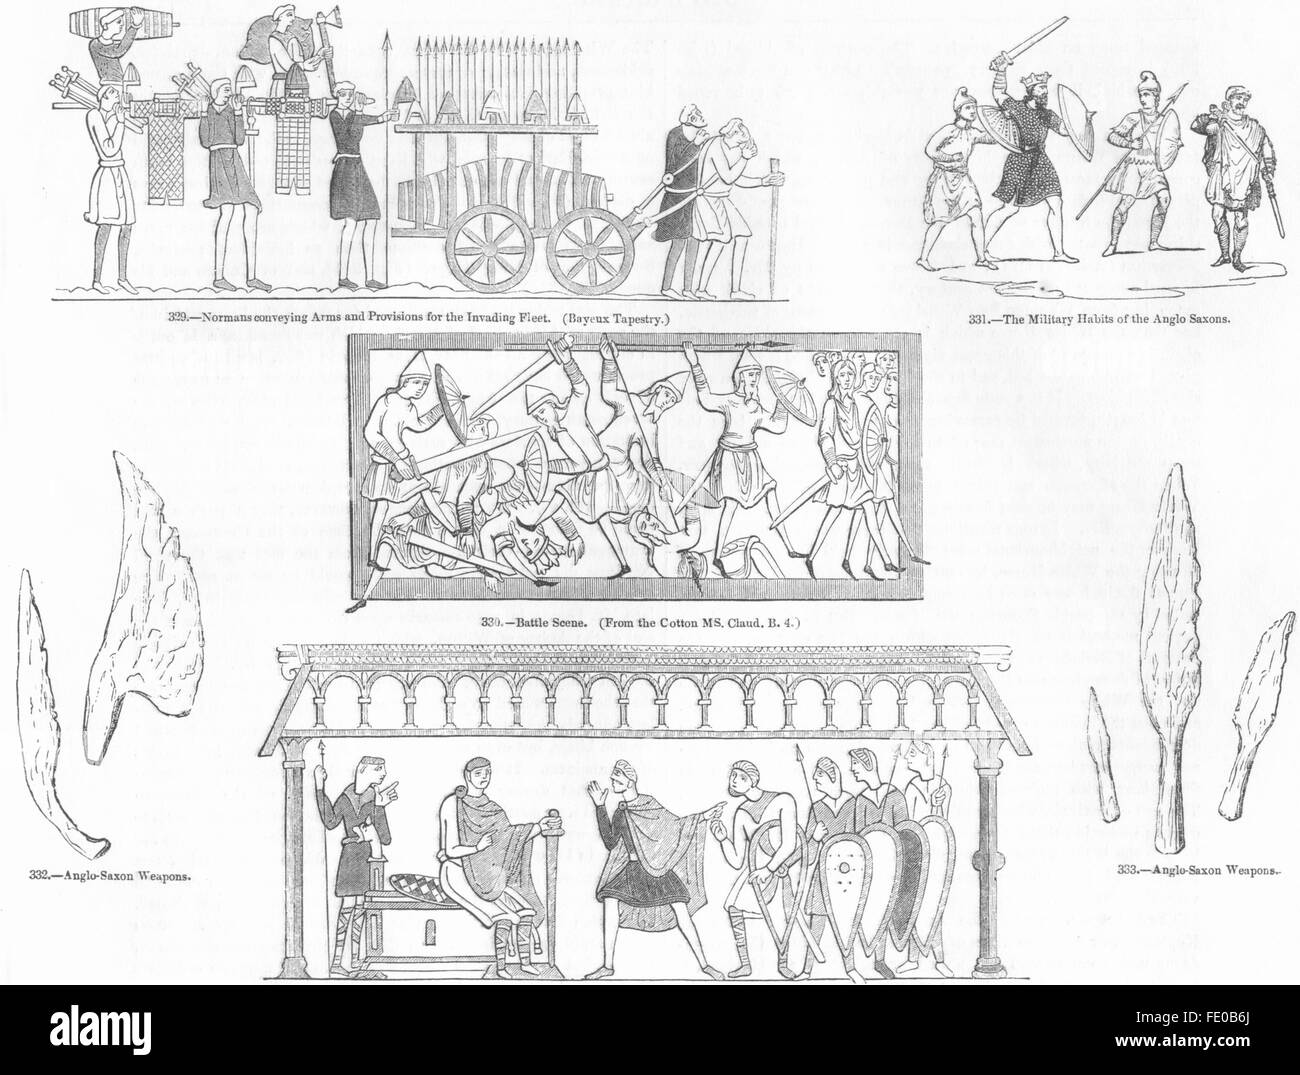 BAYEUX TAPESTRY: Scenes from; Saxon weapons, antique print 1845 Stock Photo